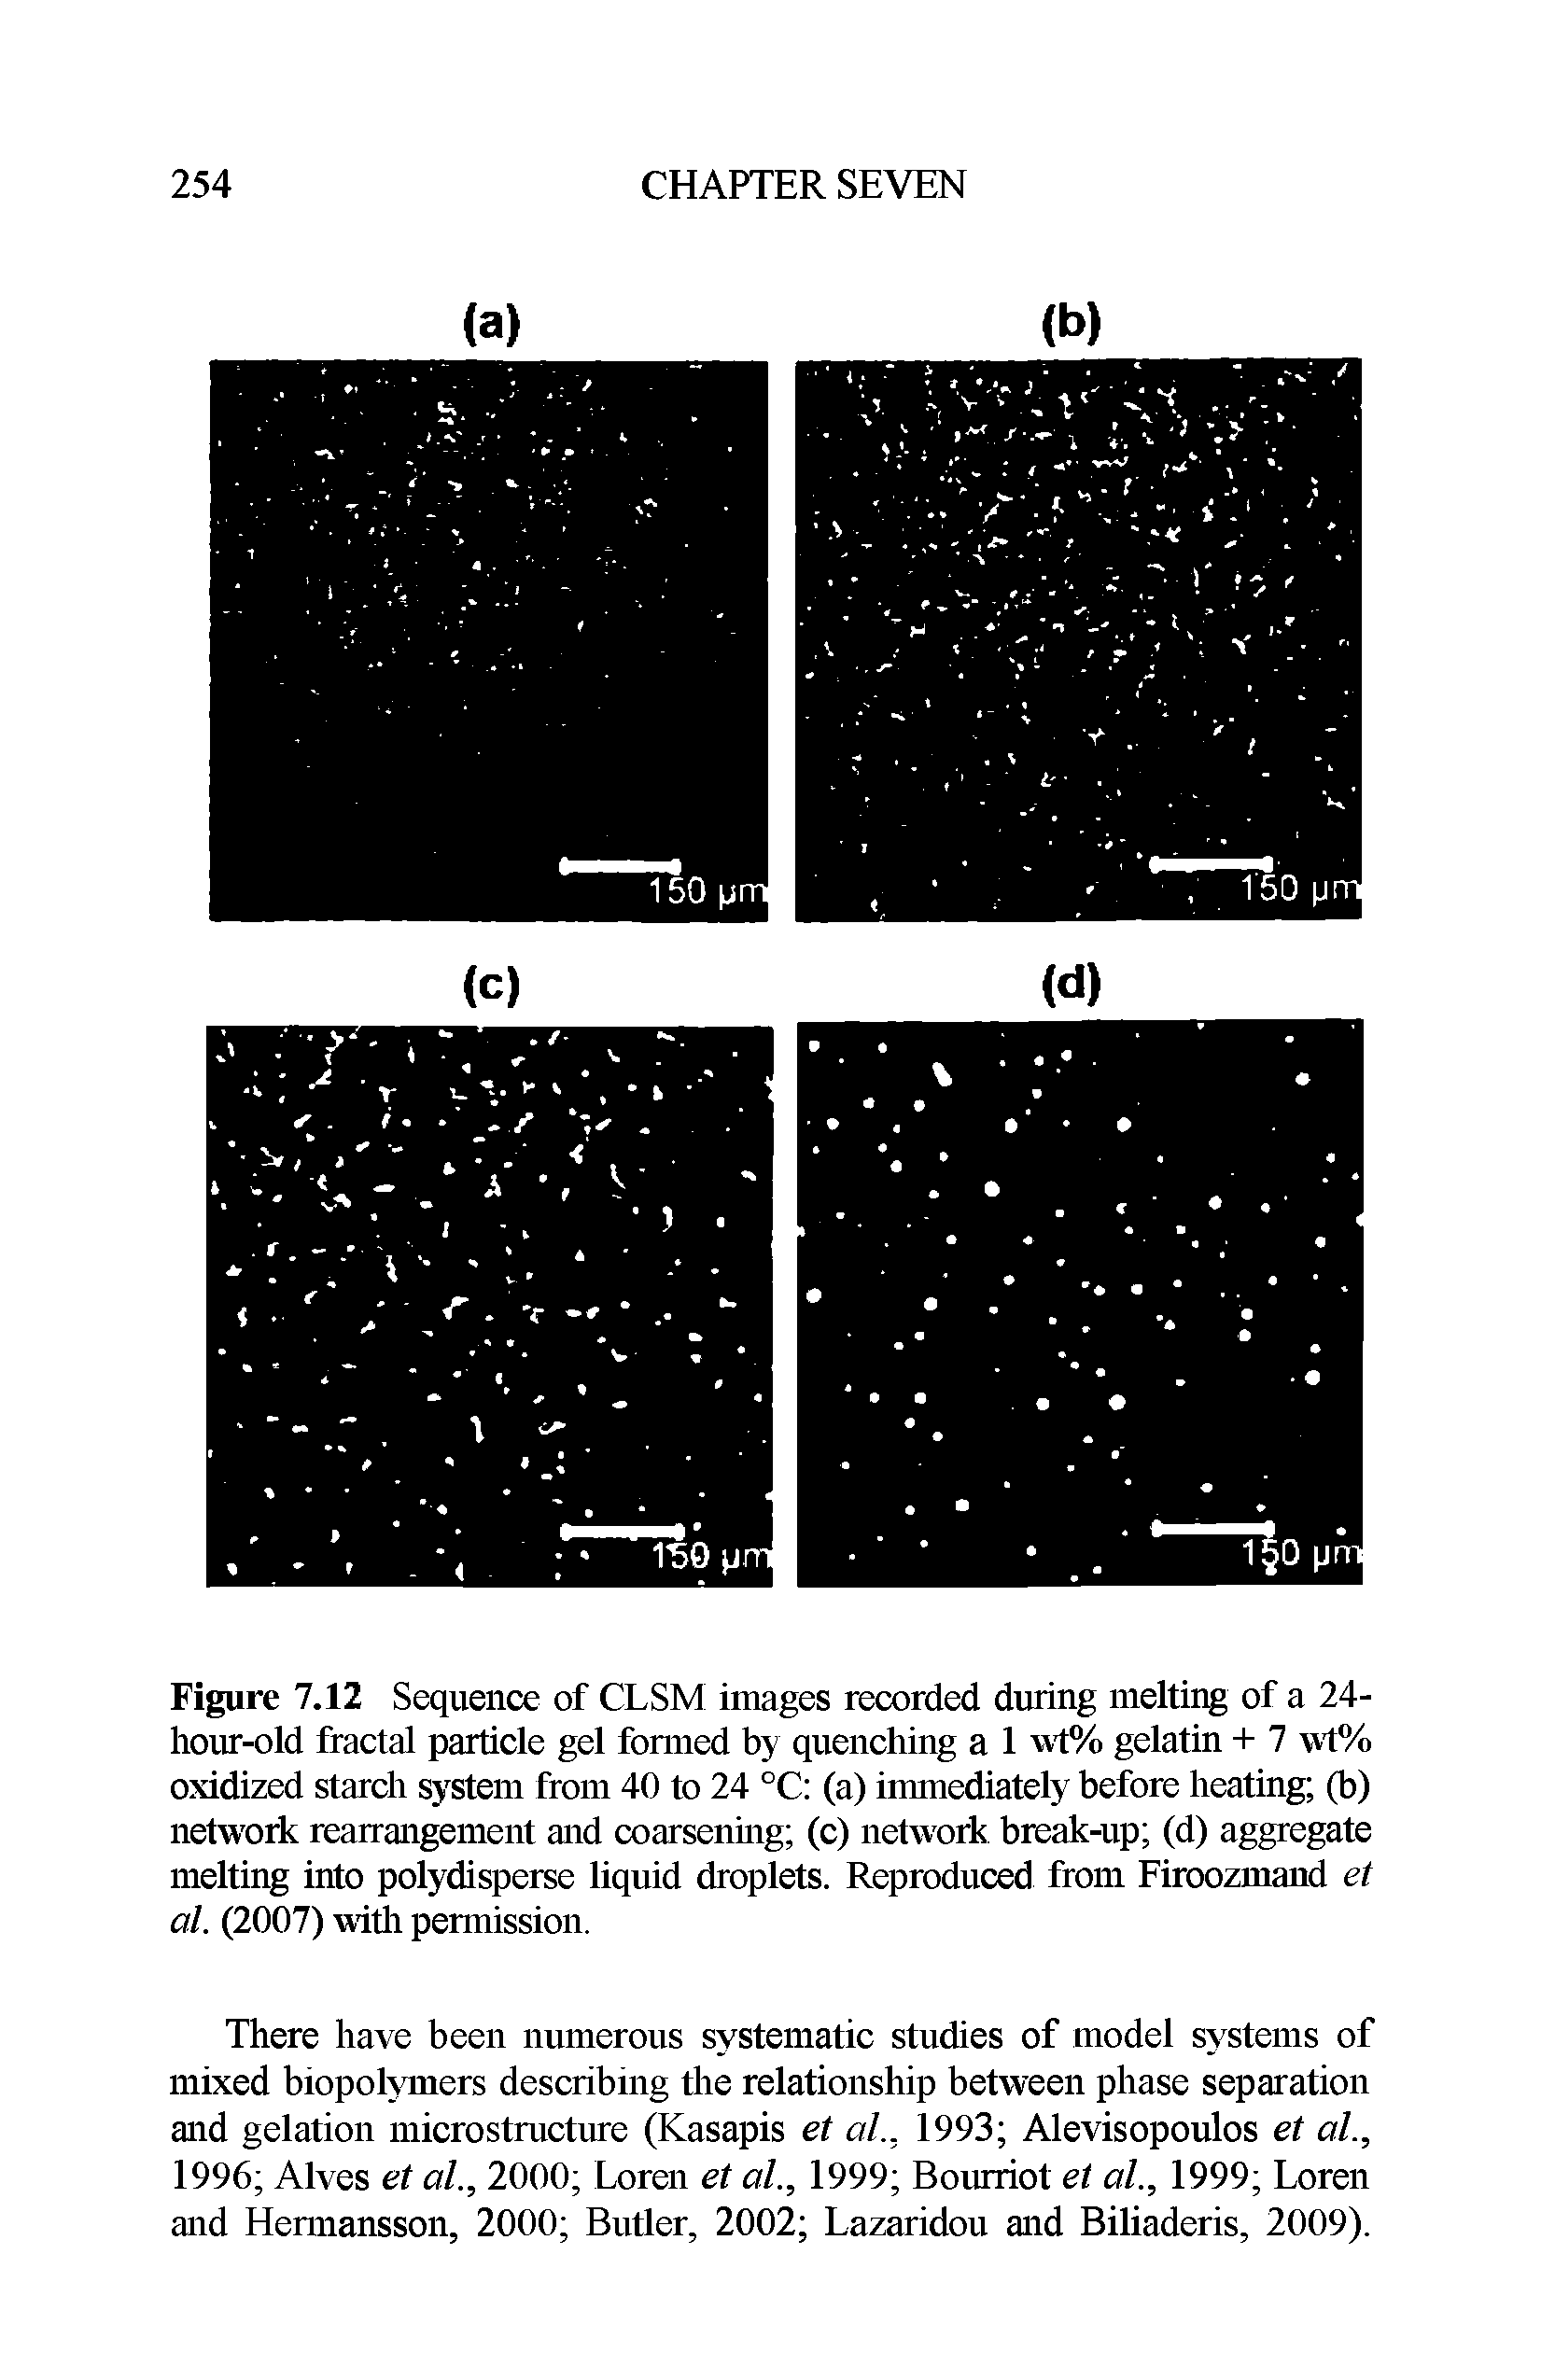 Figure 7.12 Sequence of CLSM images recorded during melting of a 24-hour-old fractal particle gel formed by quenching a 1 wt% gelatin + 7 wt% oxidized starch system from 40 to 24 °C (a) immediately before heating (b) network rearrangement and coarsening (c) network break-up (d) aggregate melting into polydisperse liquid droplets. Reproduced from Firoozmand el al. (2007) with permission.